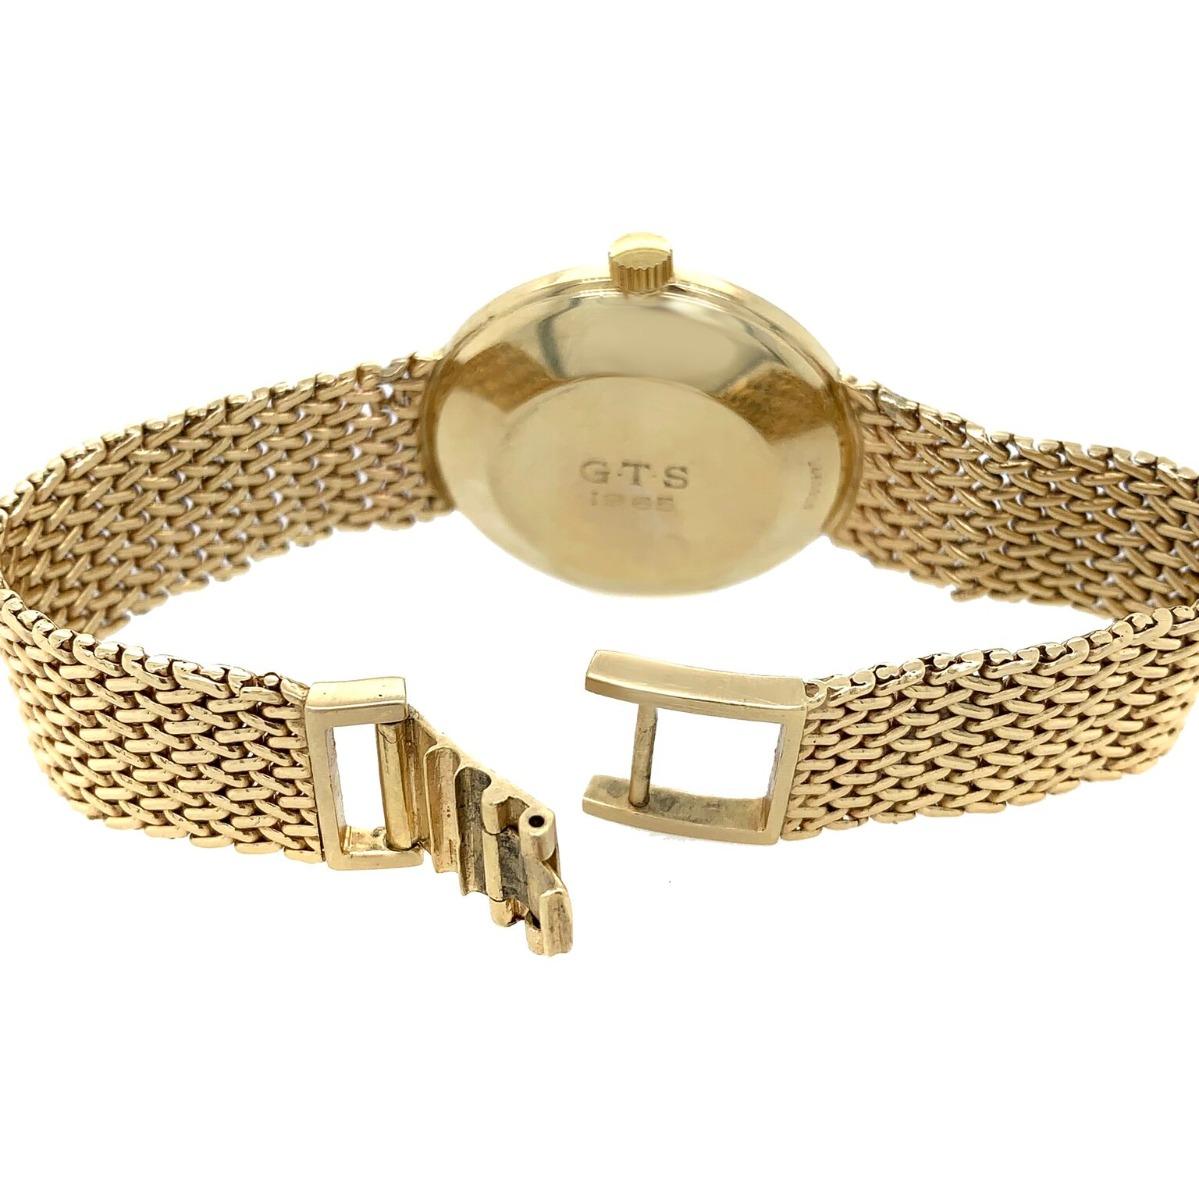 Brand: Tiffany & Co.
Metal: 14k Yellow Gold
Condition: Excellent
Year Of Manufacture: Circa 1940s
Length: 7.71 inches
Total Item Weight:  61.6 g

SKU#W-00420